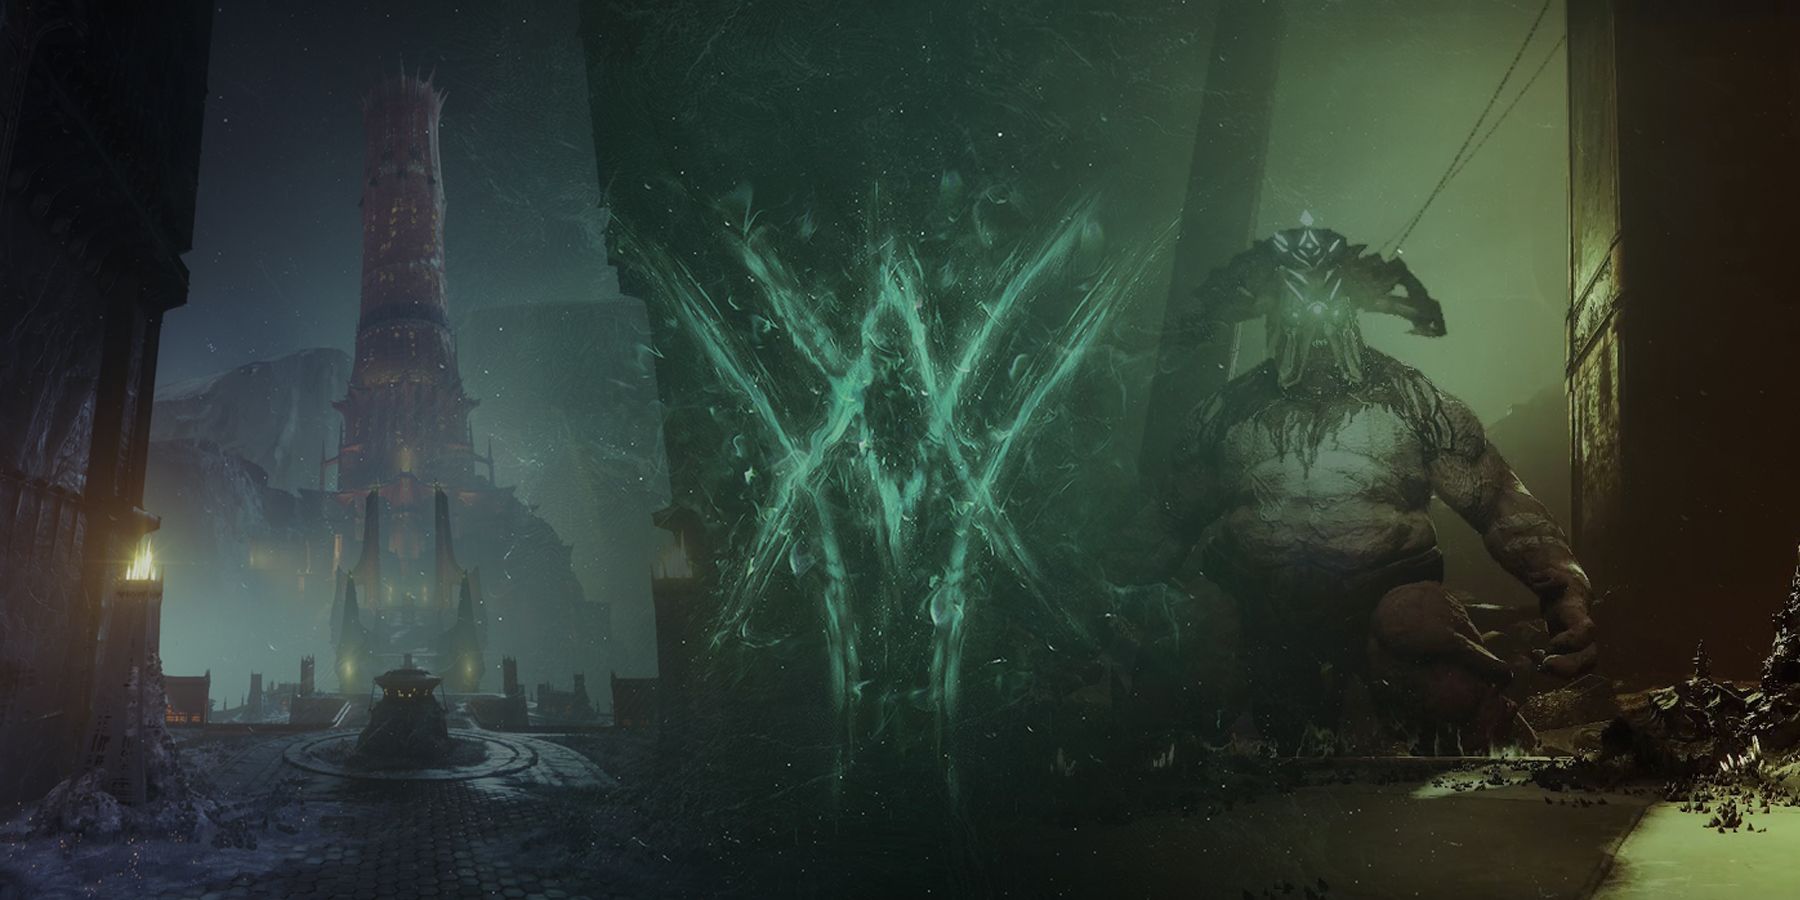 The Redkeep and the Crown of Sorrow from Destiny 2 with Savathun's sigil in the foreground.